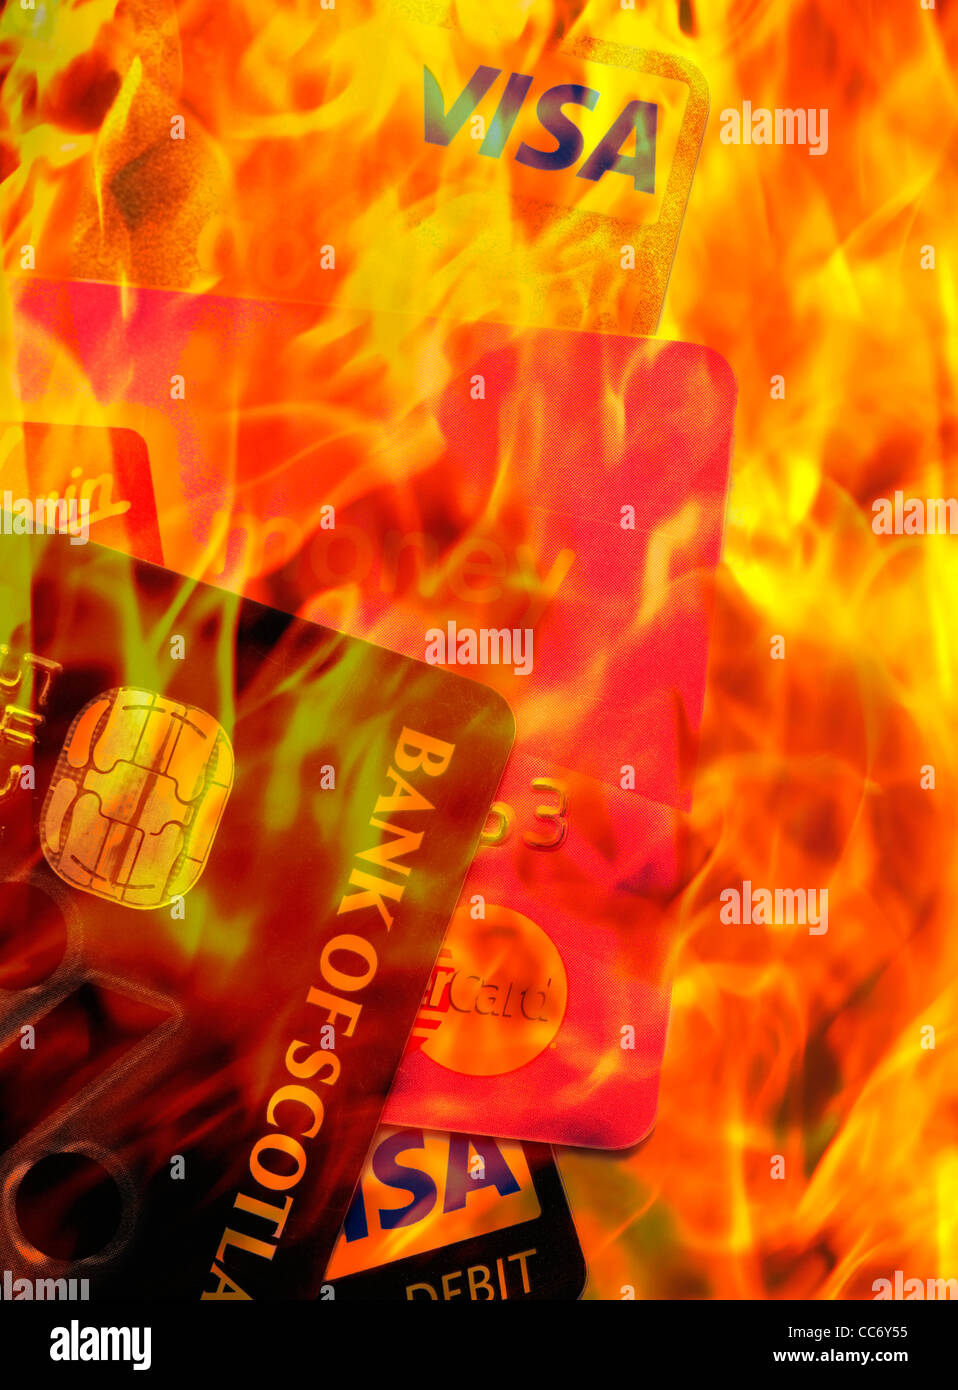 Concept image of UK Credit and Debit cards on fire with orange flame Stock Photo